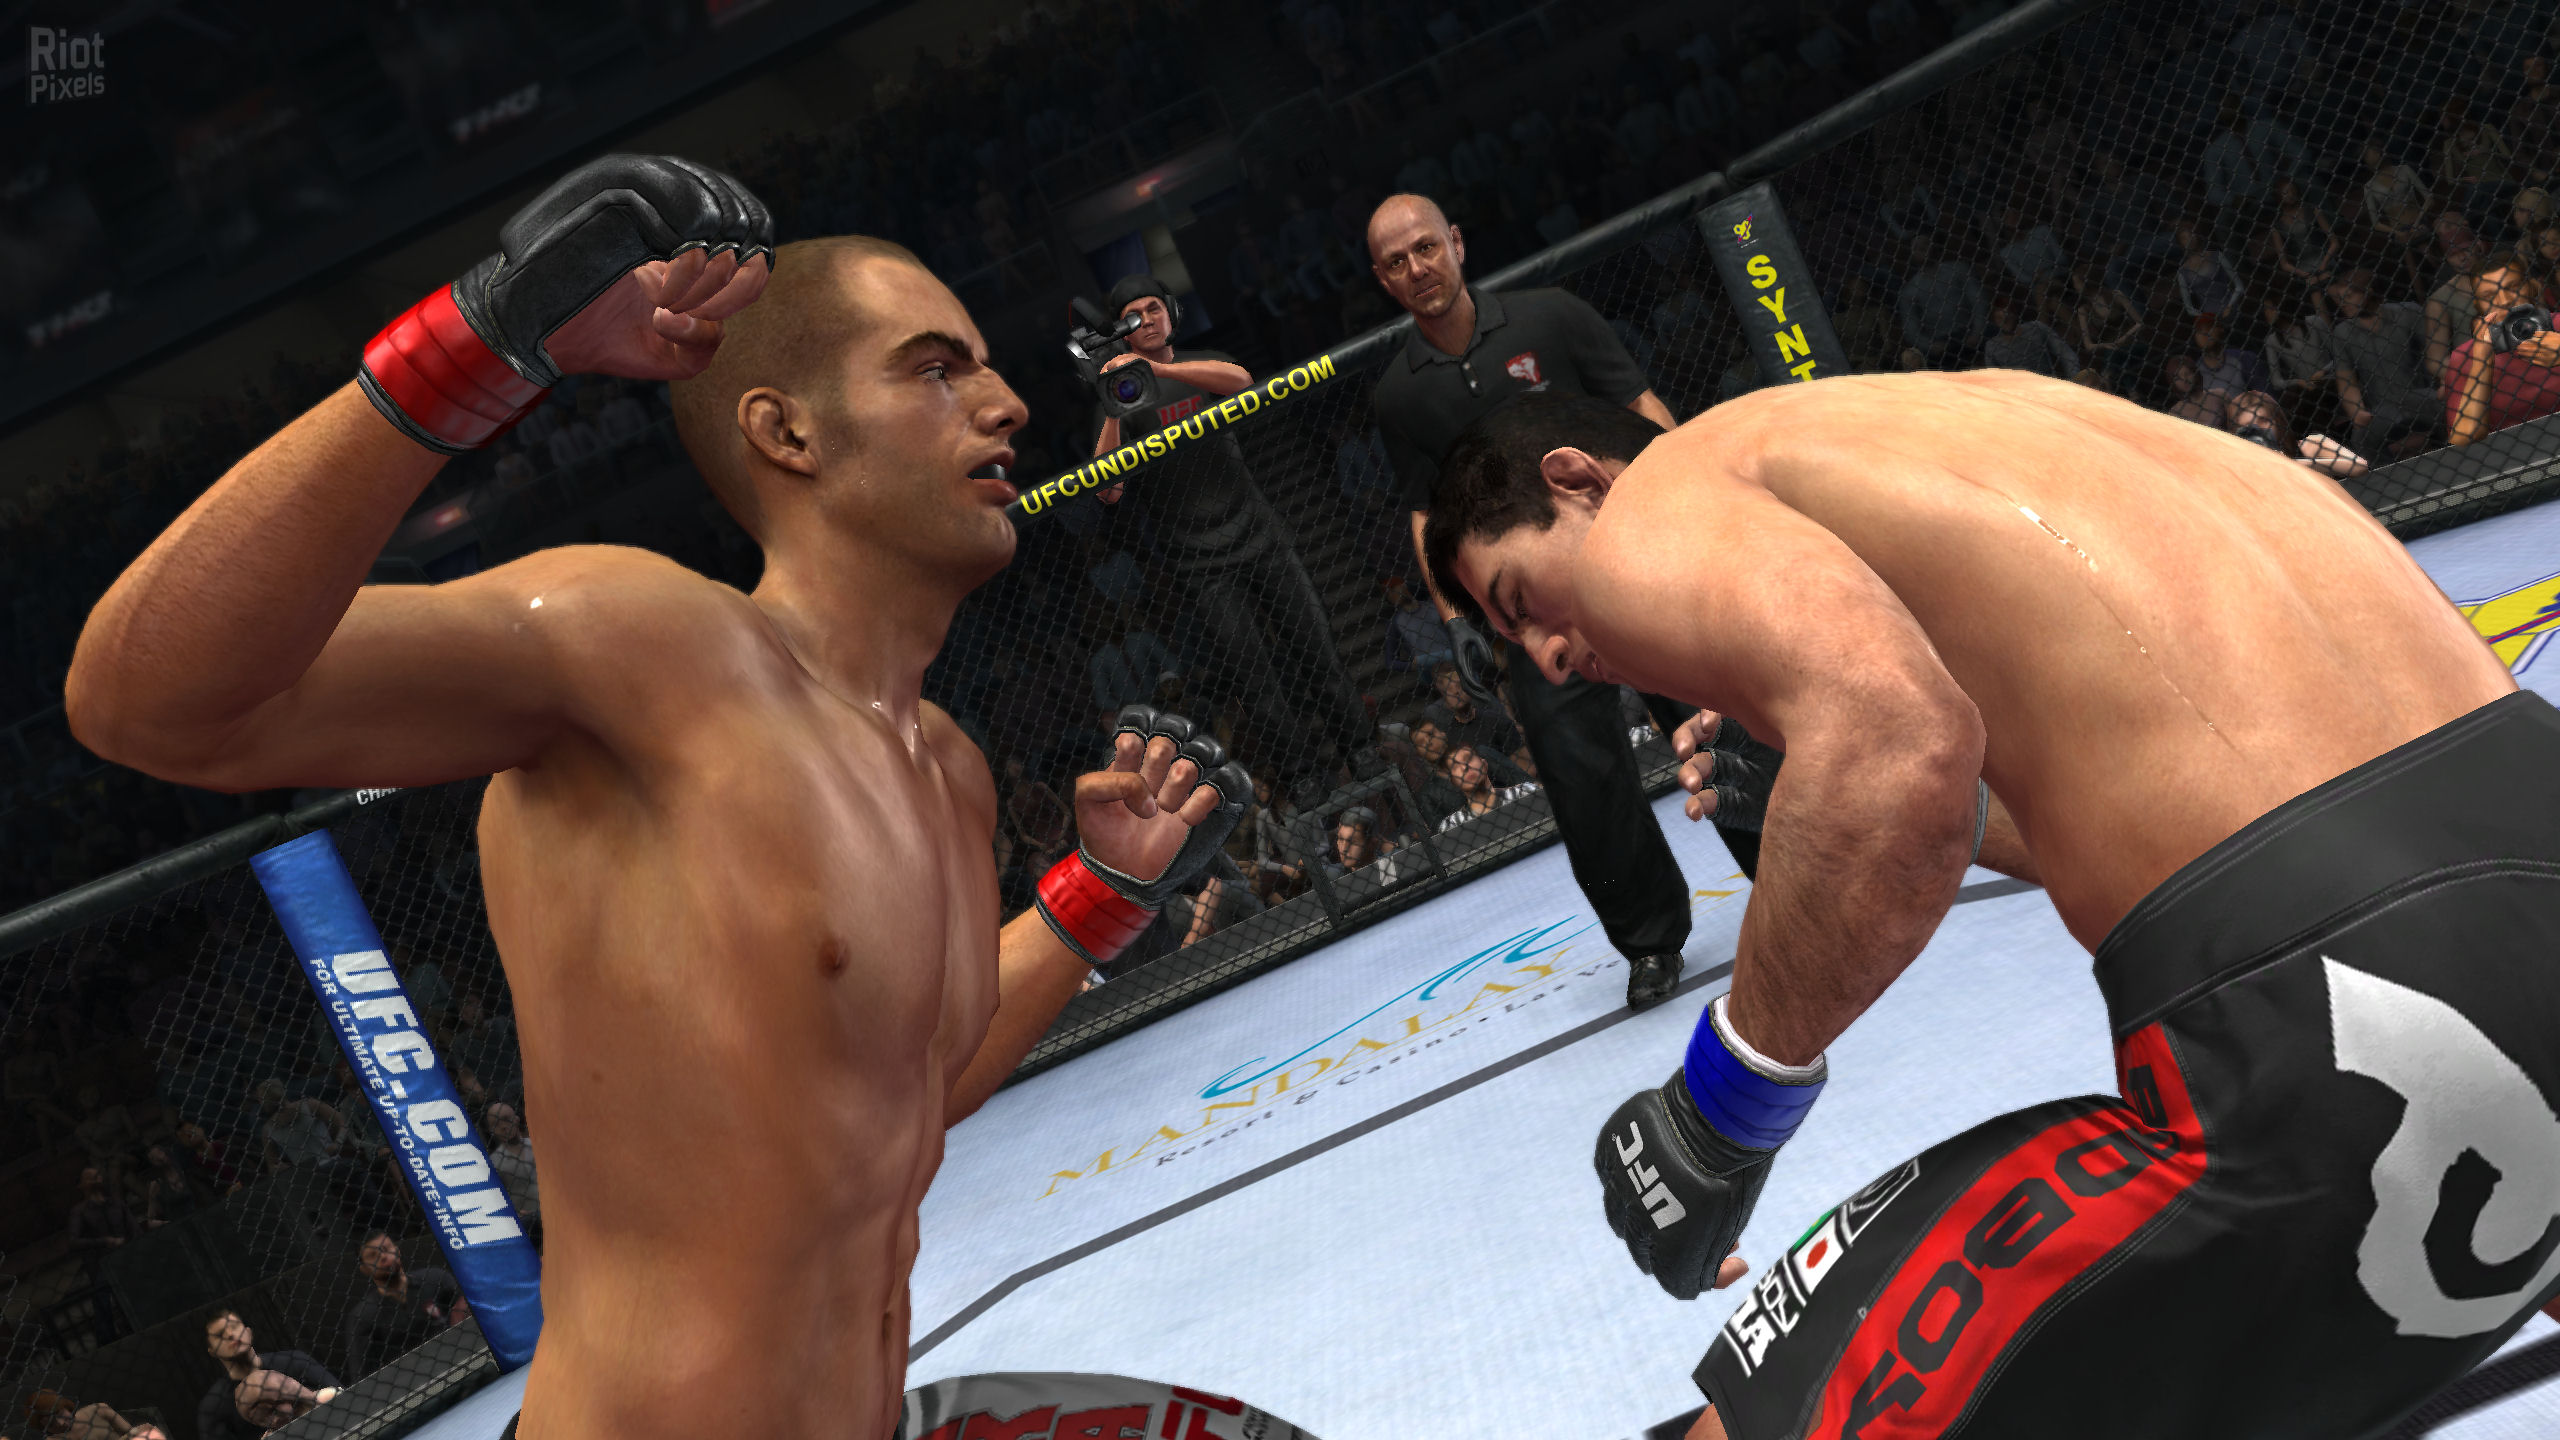 ufc games for pc free download